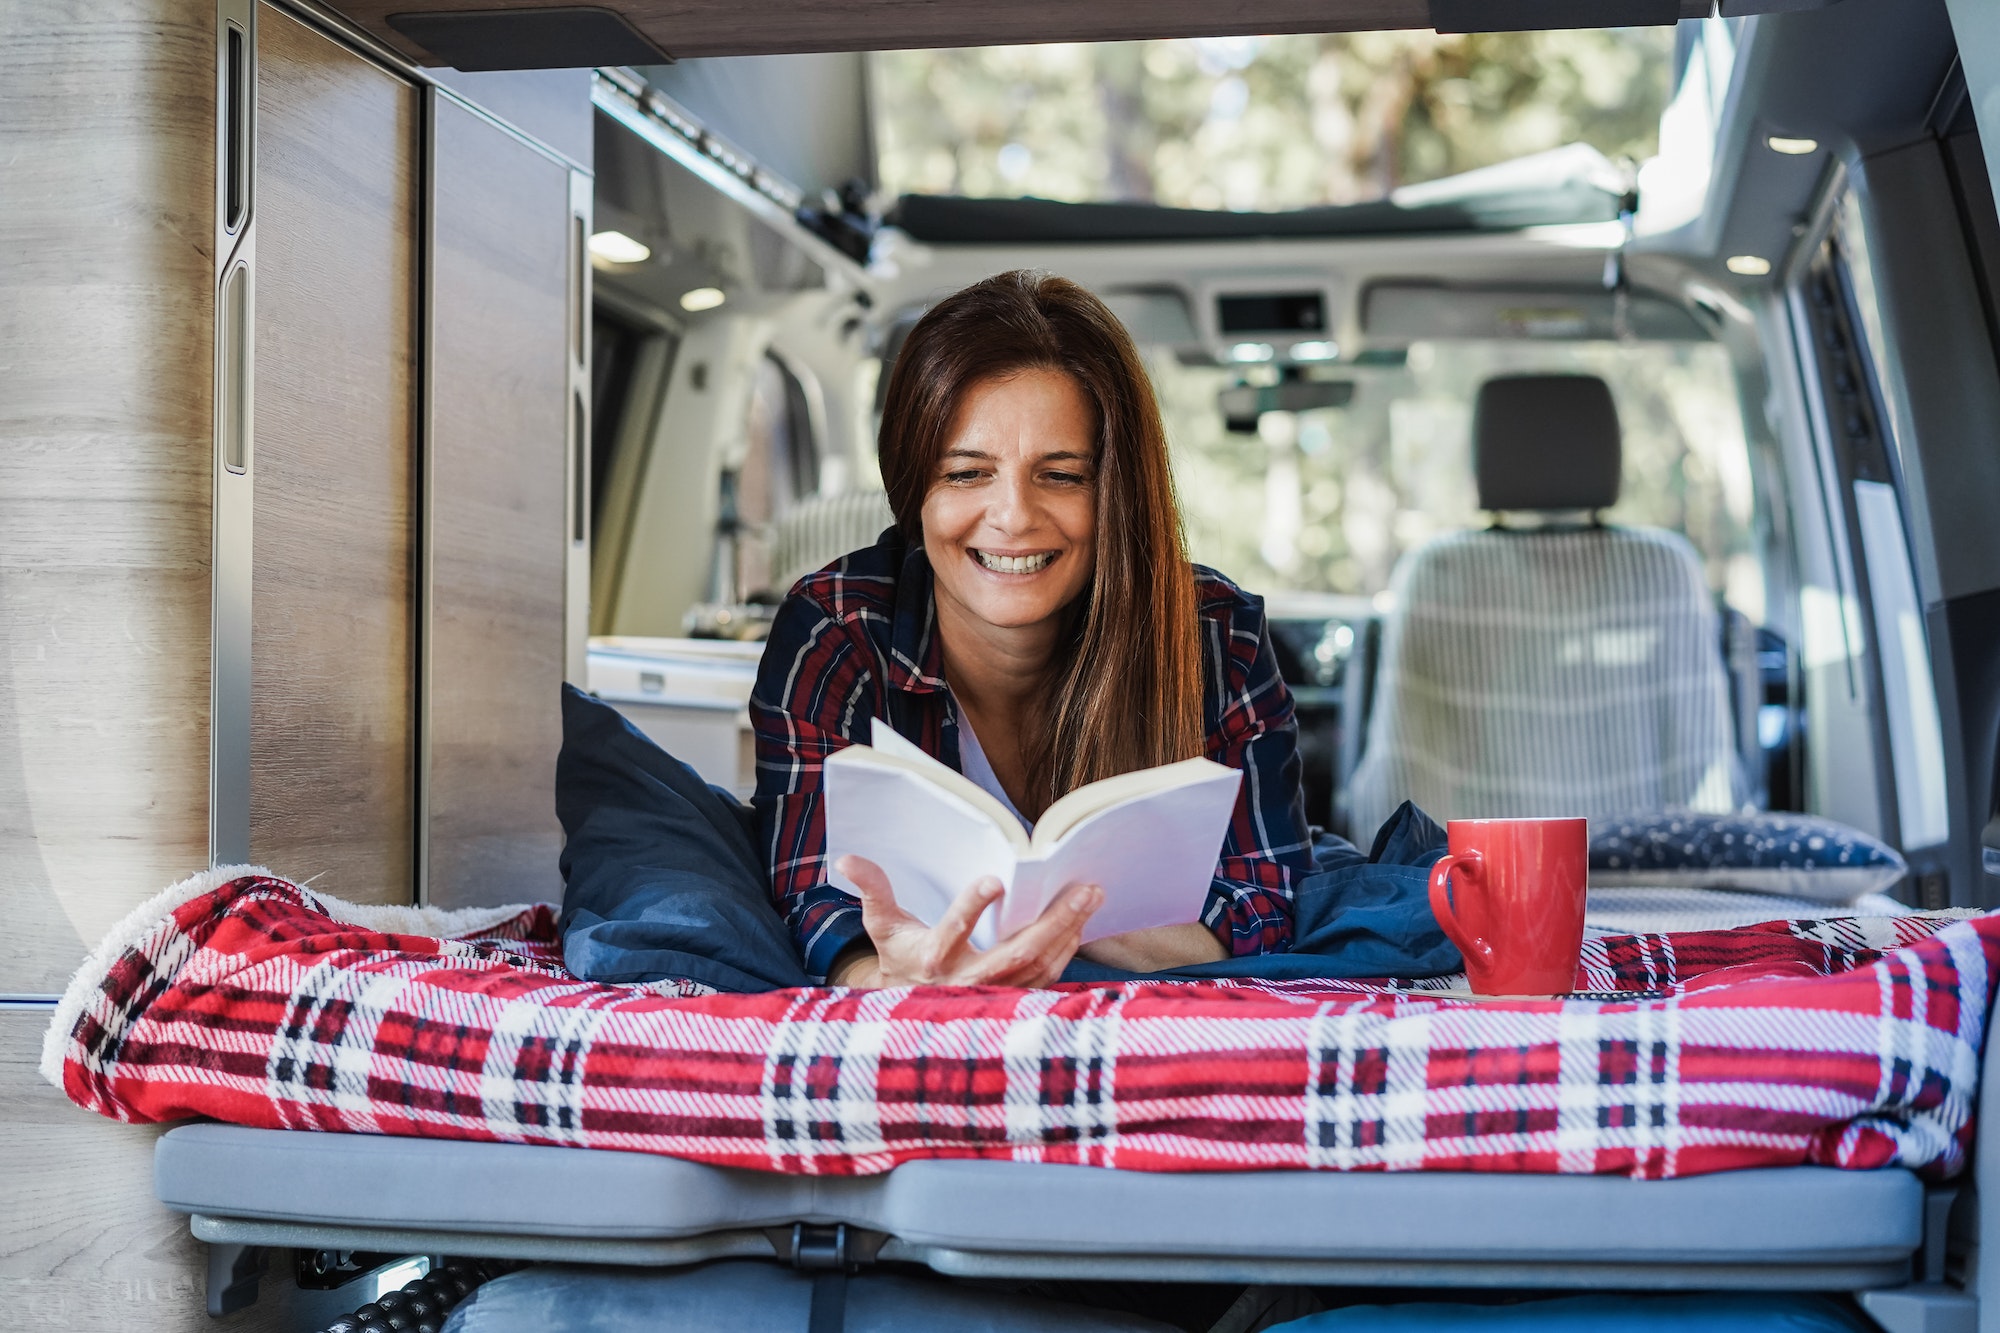 https://www.muchoneumatico.com/blog/wp-content/uploads/2022/09/senior-woman-having-fun-inside-camper-van-while-reading-a-book-and-drinking-coffee-focus-on-face.jpg